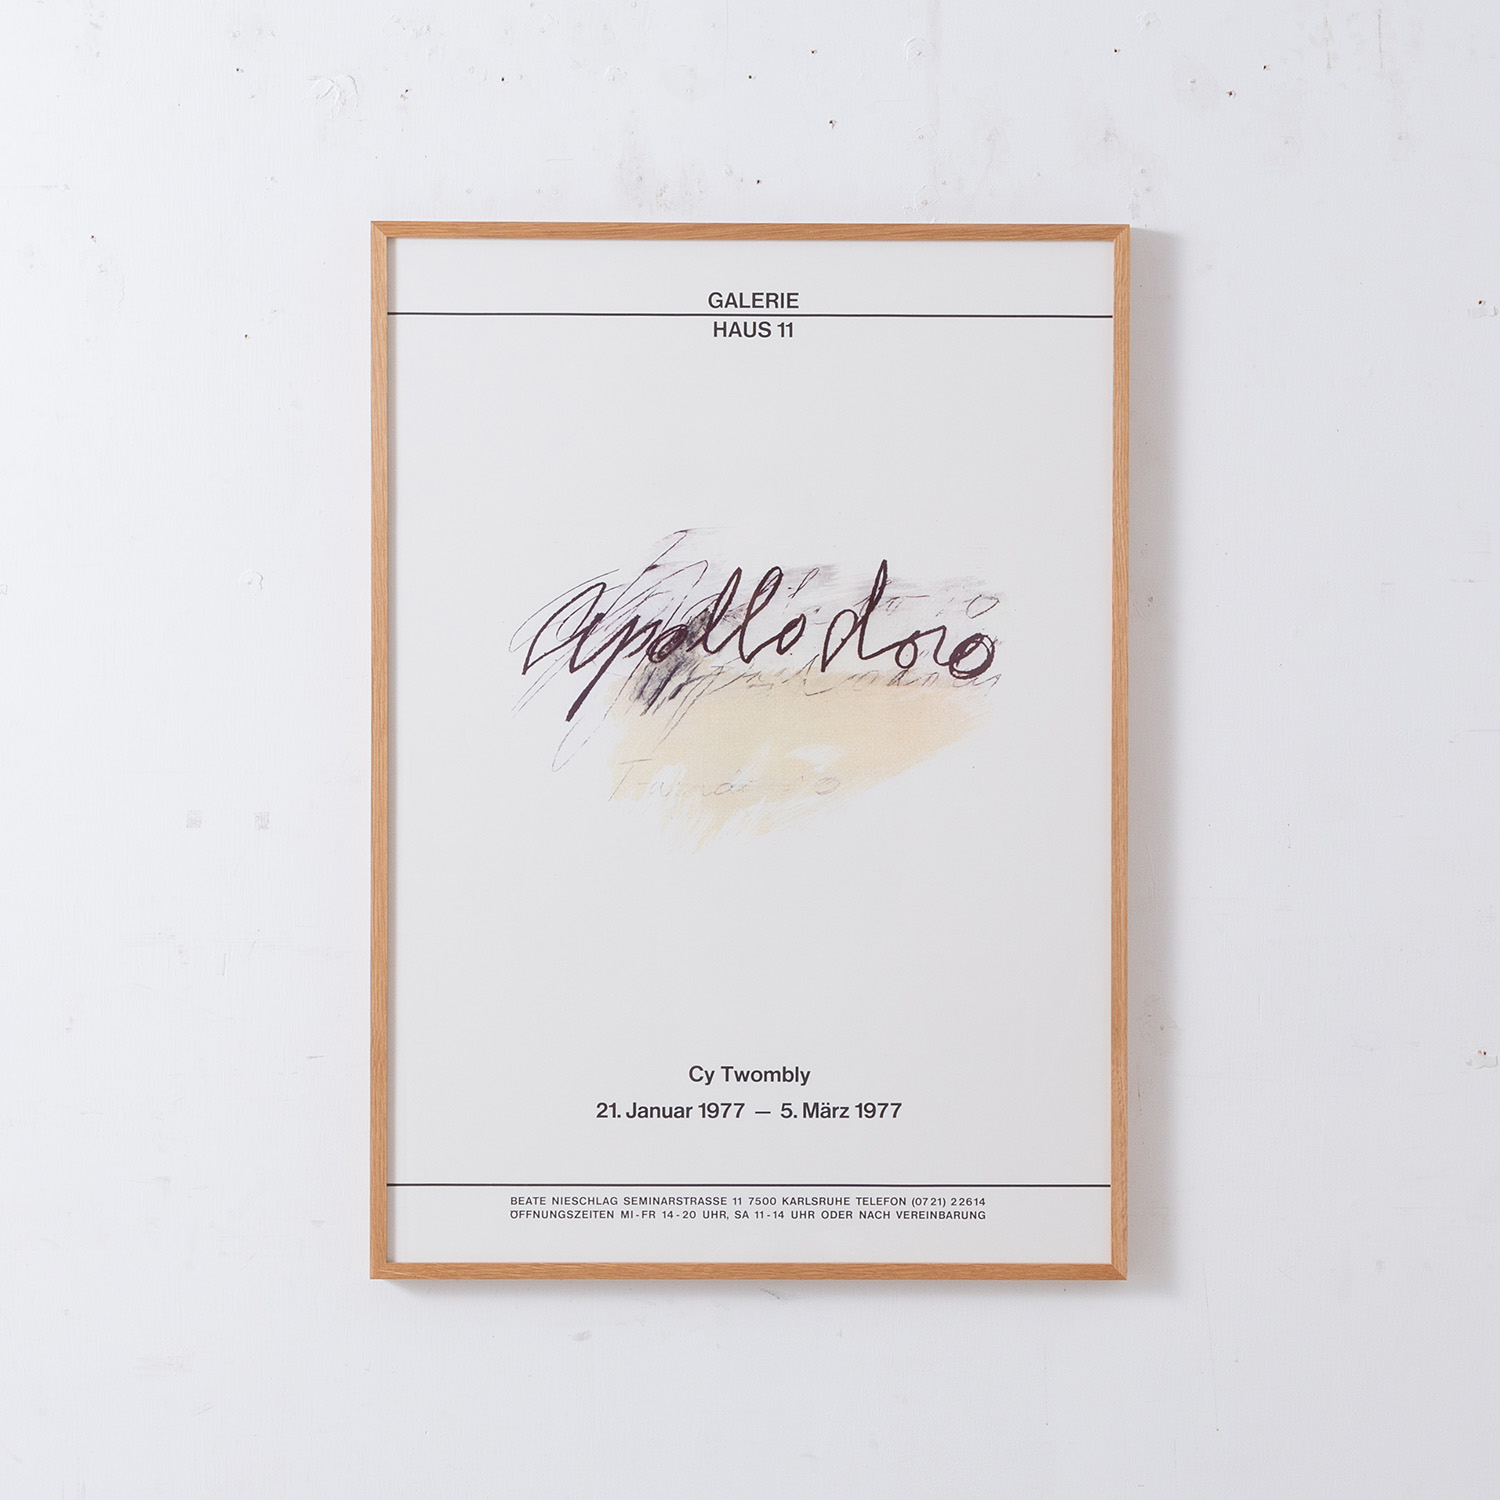 ‘Apollodoro’ by Cy Twombly for Gallery Haus 11 , 1977